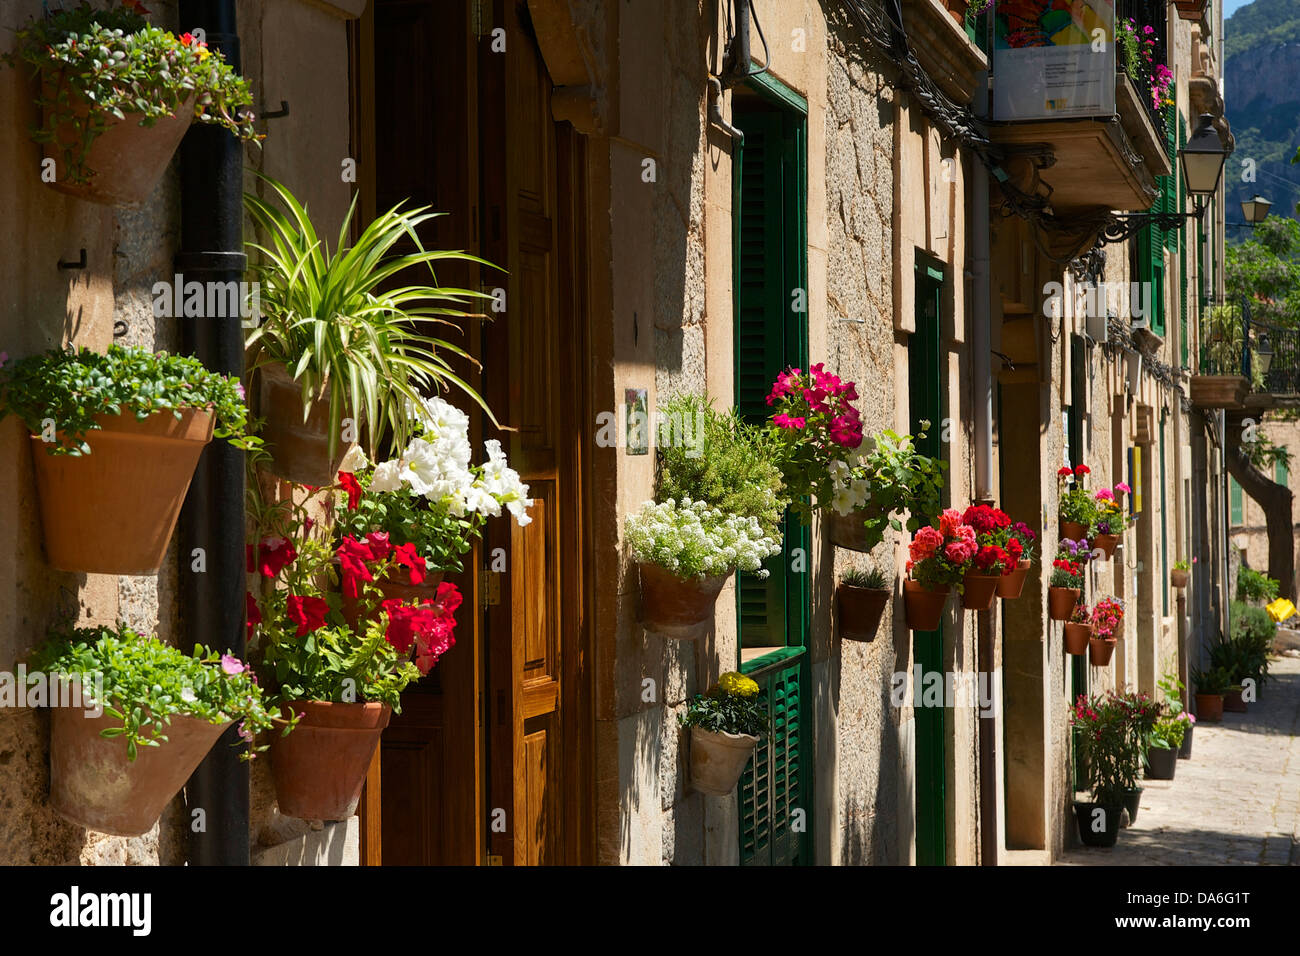 Street decorated with flowers Stock Photo